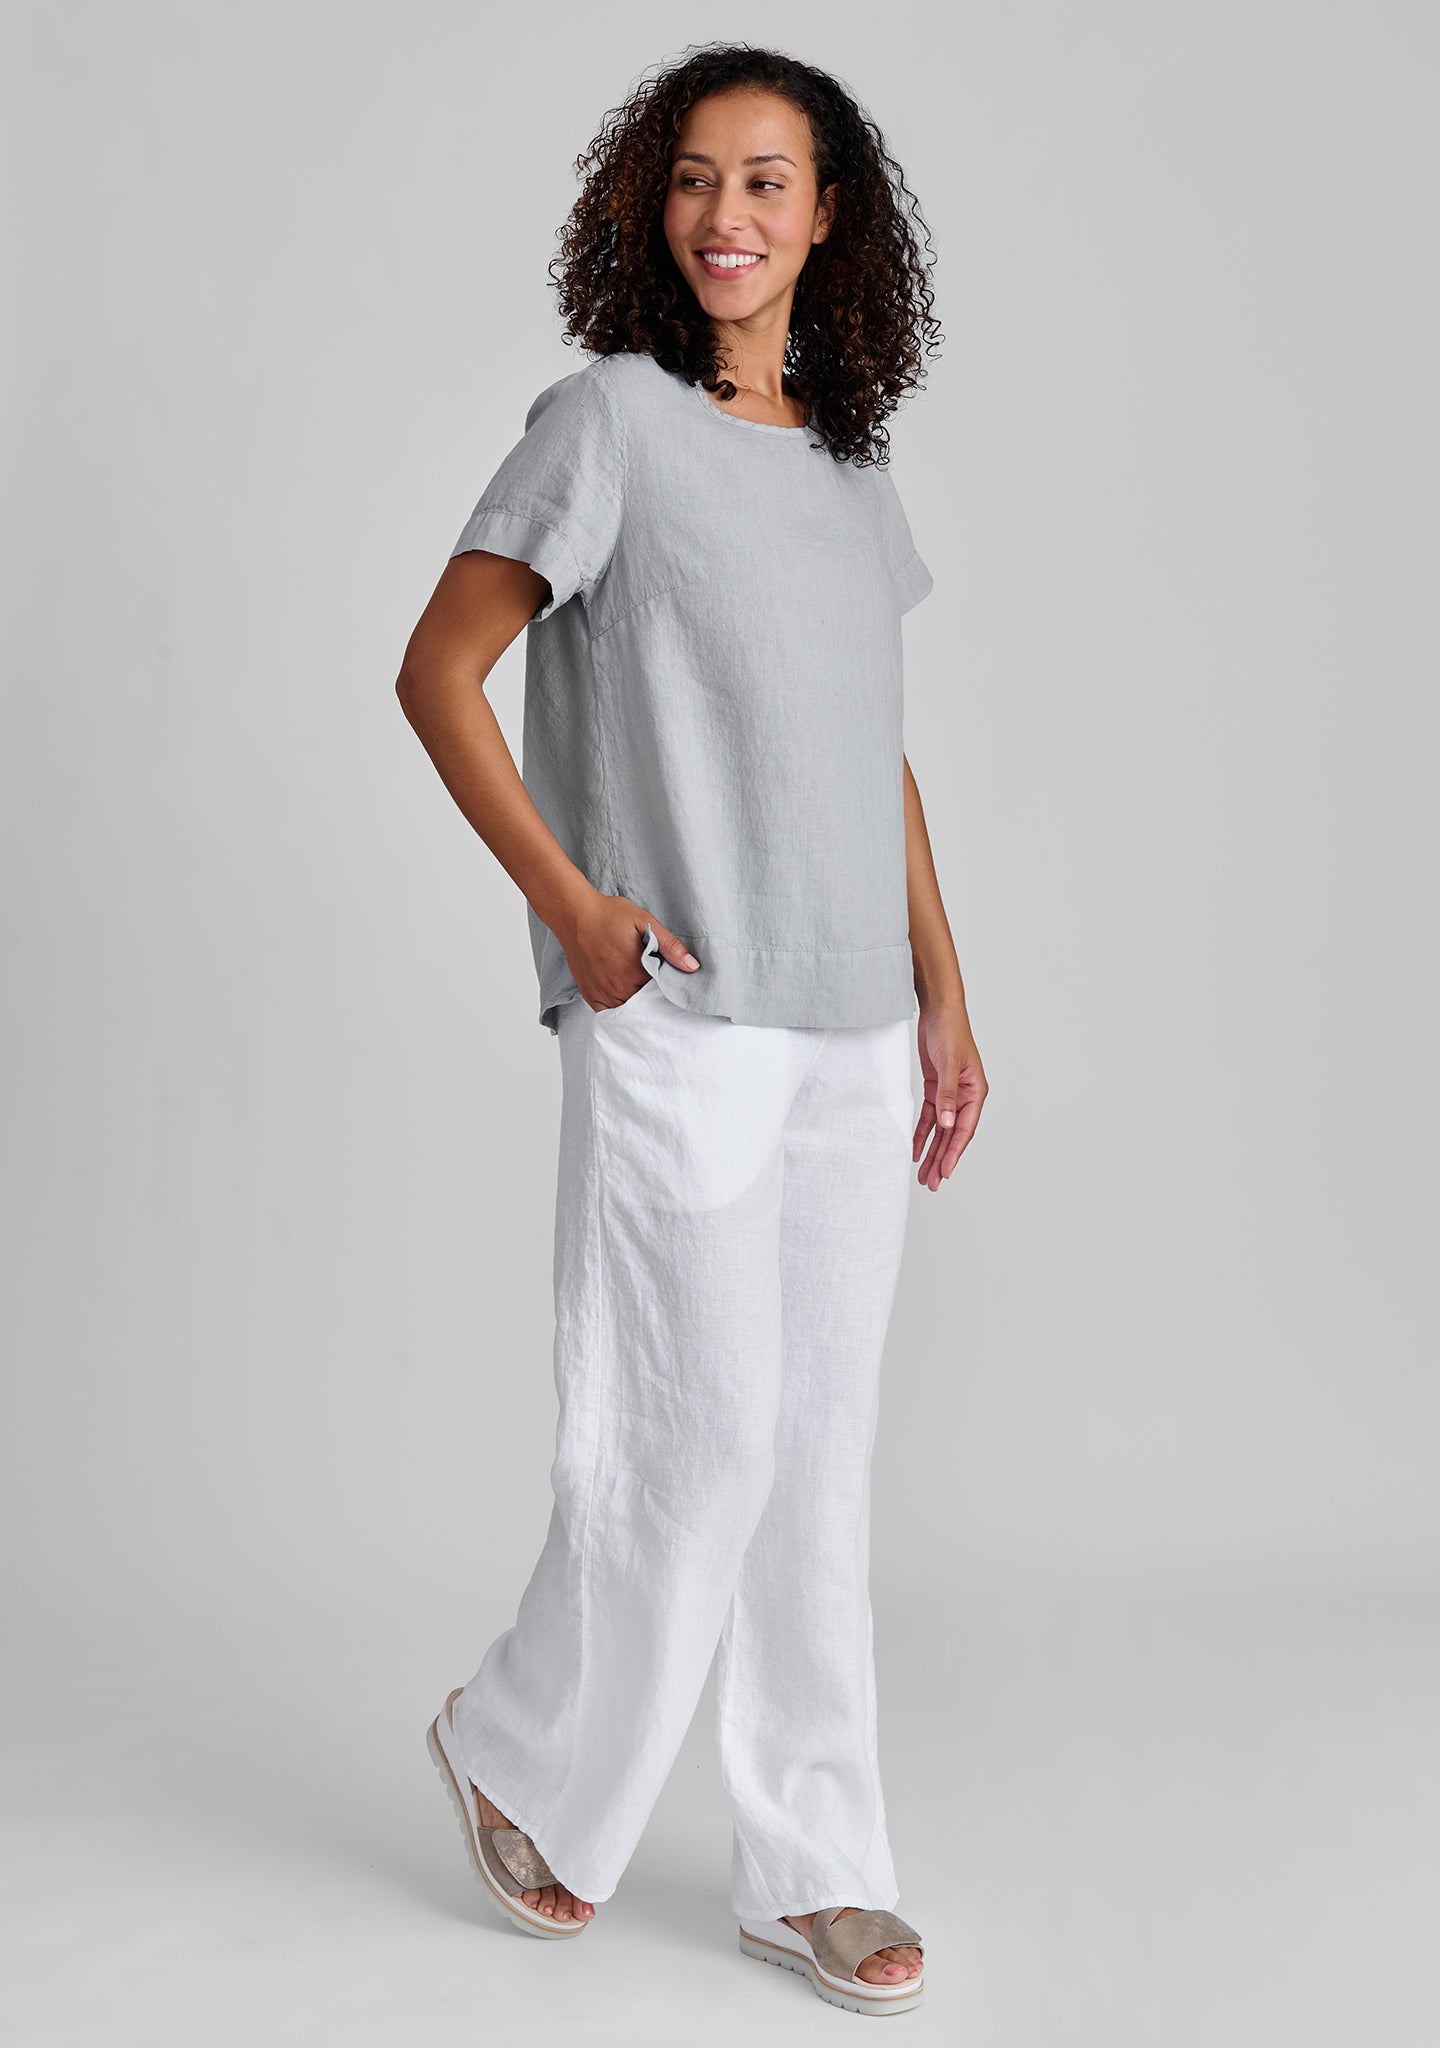 FLAX linen tee in grey with linen pants in white